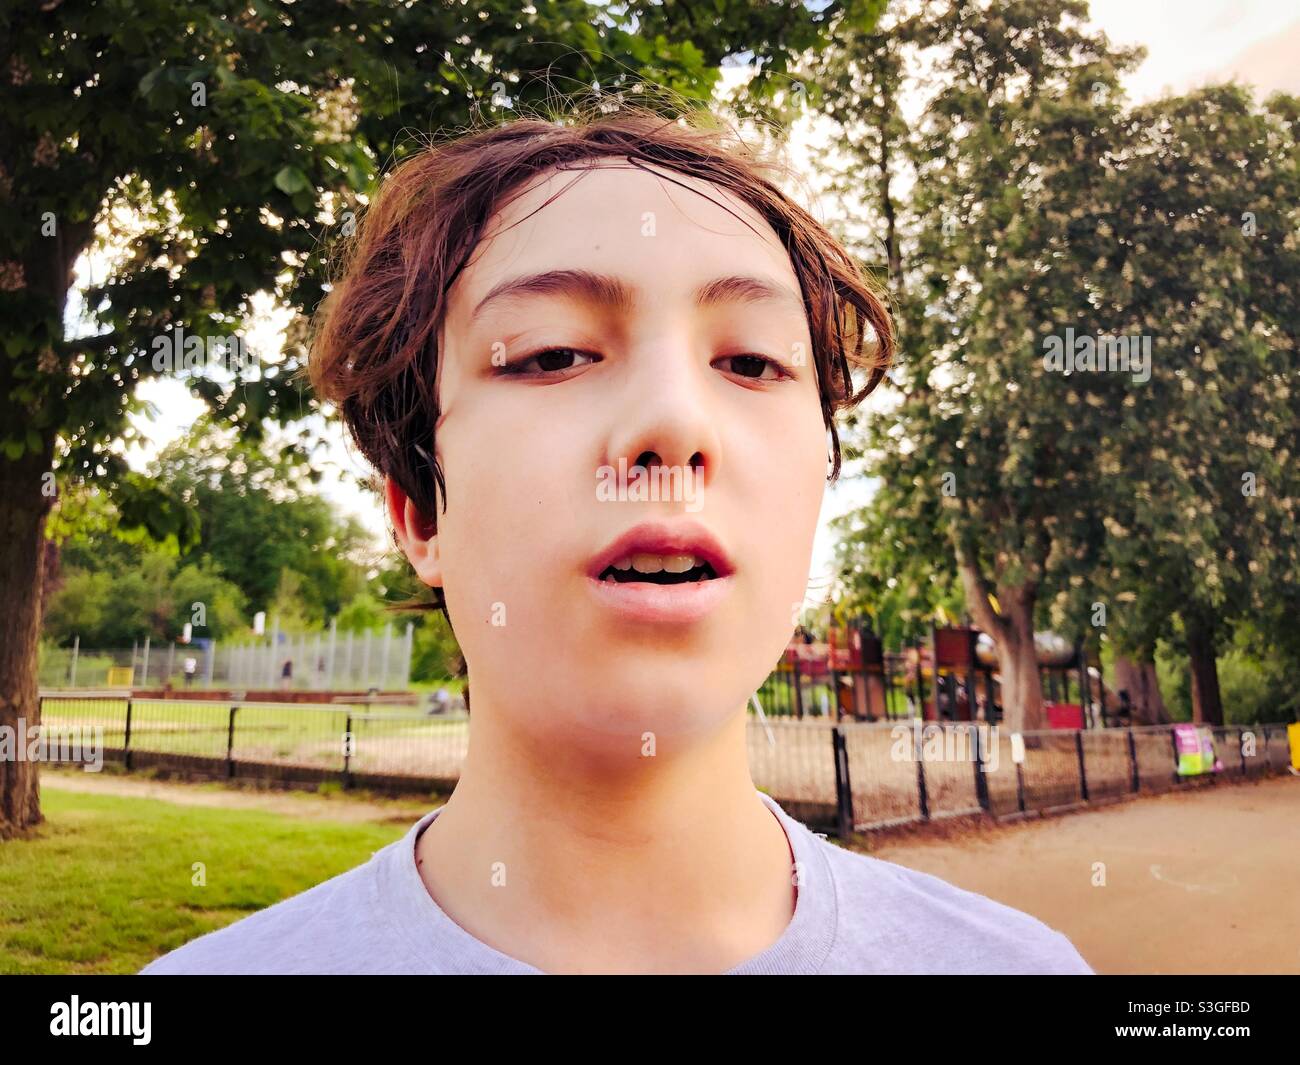 Hot and tired looking boy in the park. Stock Photo